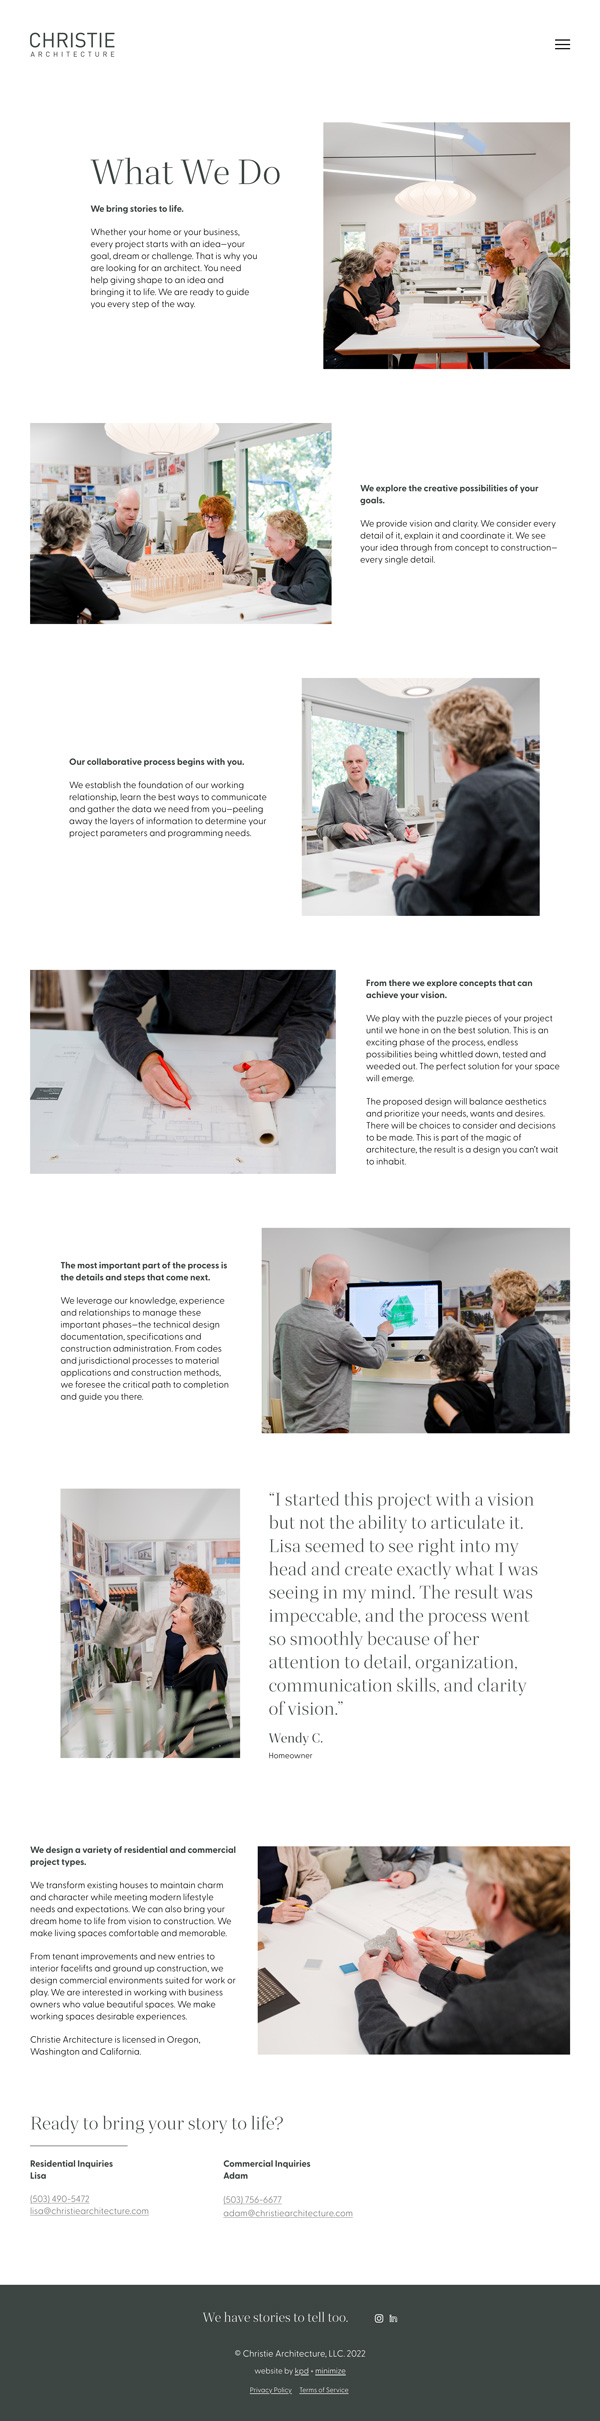 Christie Architecture website what we do page full length